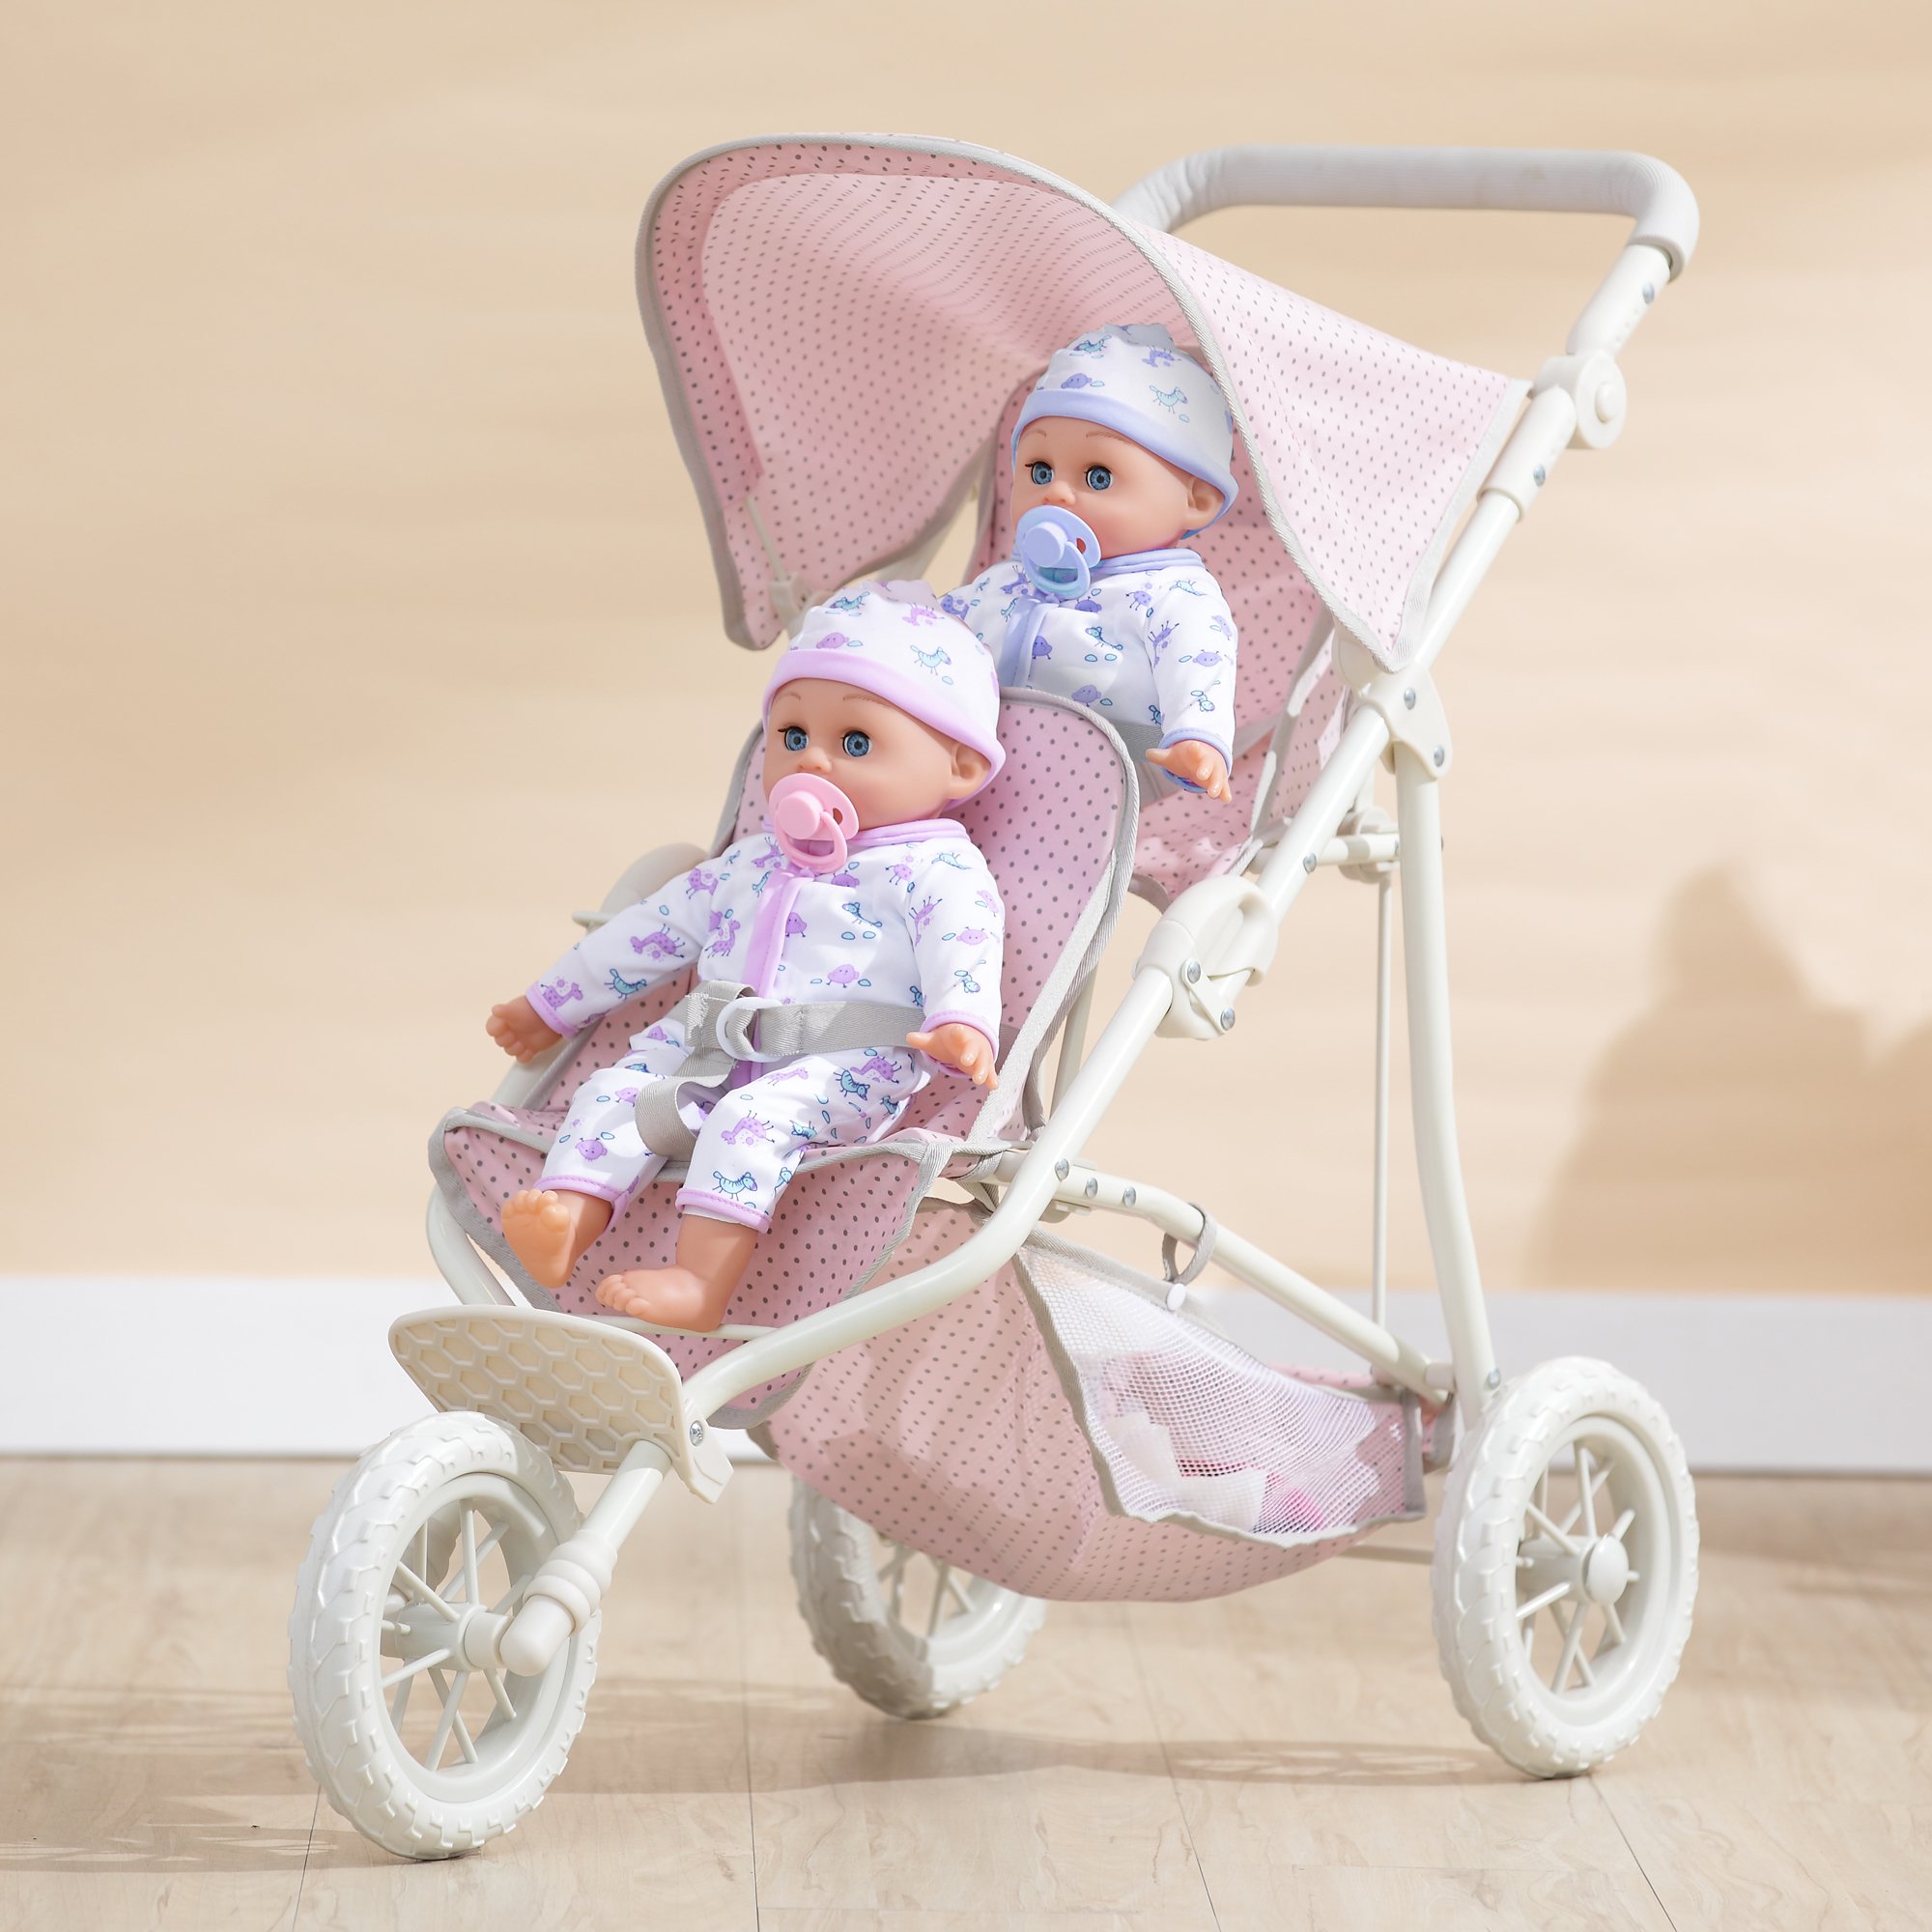 Olivia's Little World Twin Doll Stroller Polka Dots Princess Collection, Baby Doll Jogging Stroller with Canopy for 18